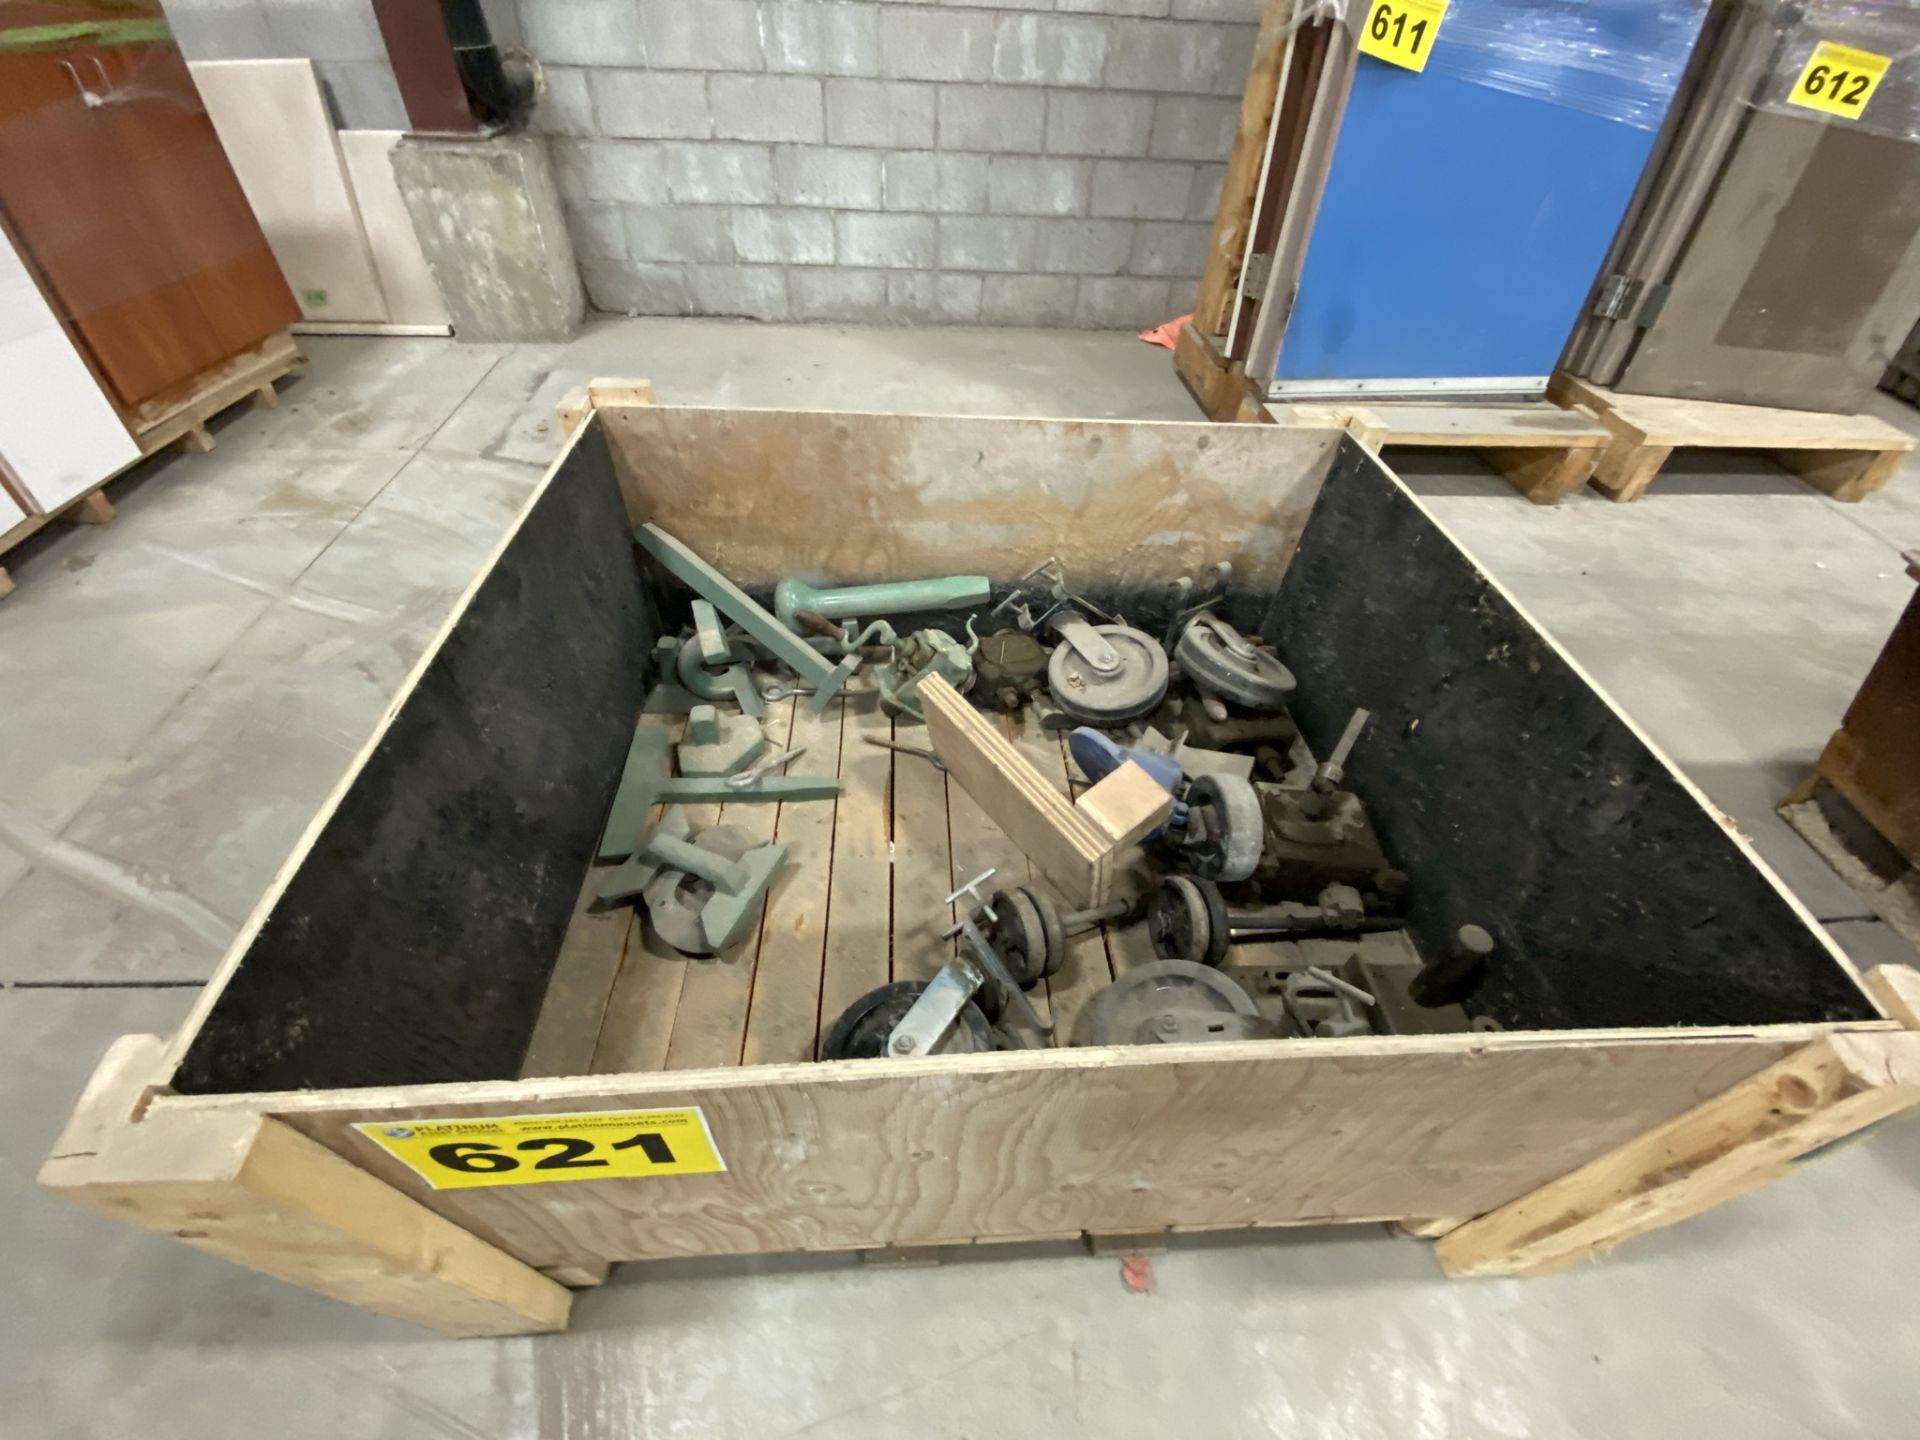 LOT OF SHEET FOAM TOOLS AND CASTERS IN TOTE